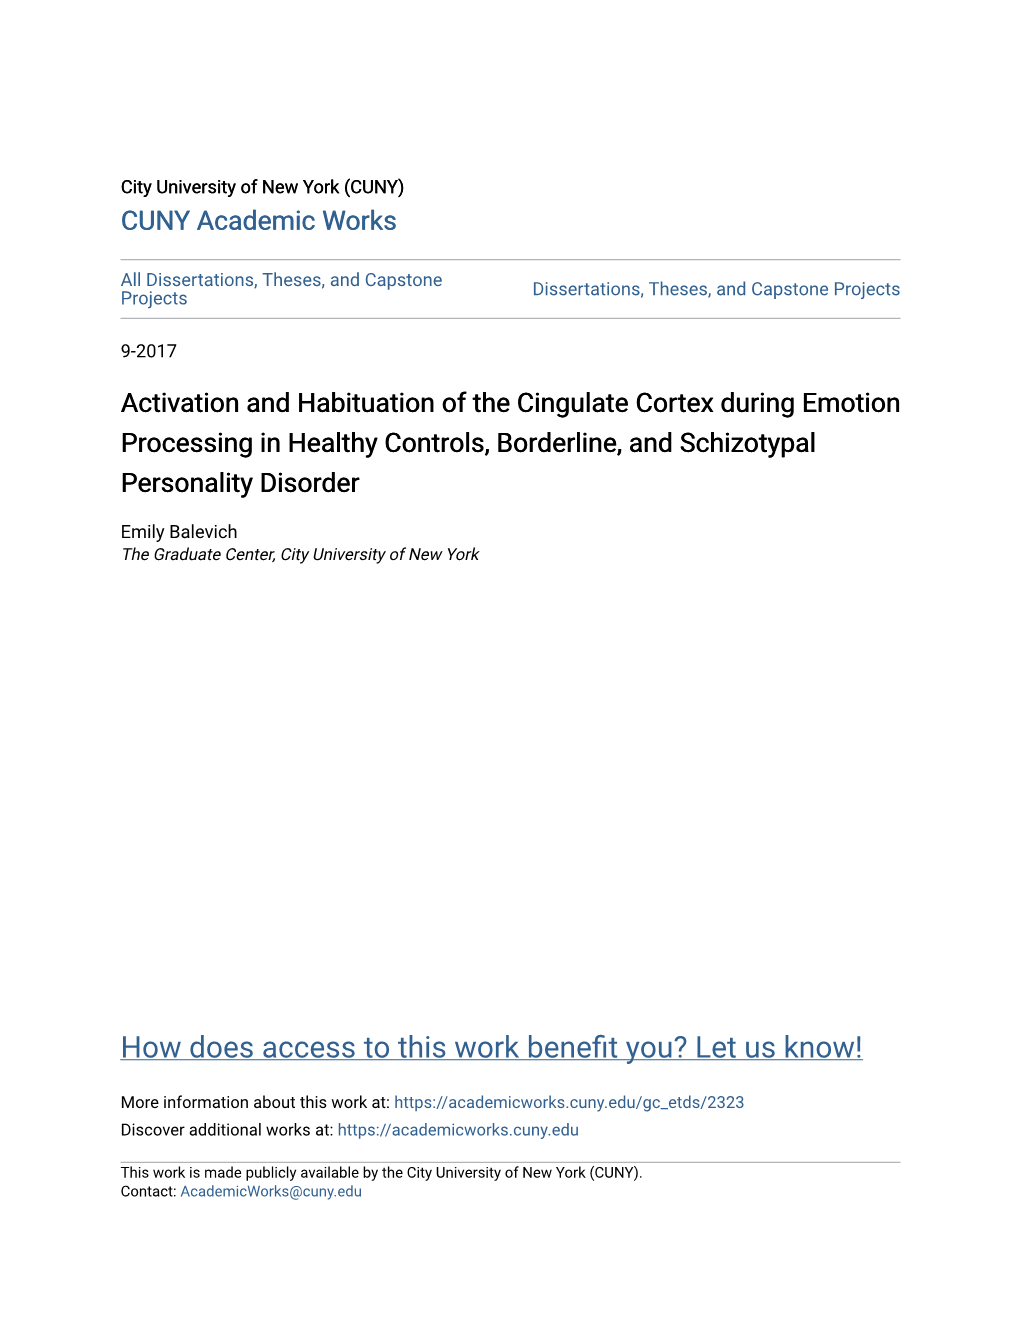 Activation and Habituation of the Cingulate Cortex During Emotion Processing in Healthy Controls, Borderline, and Schizotypal Personality Disorder